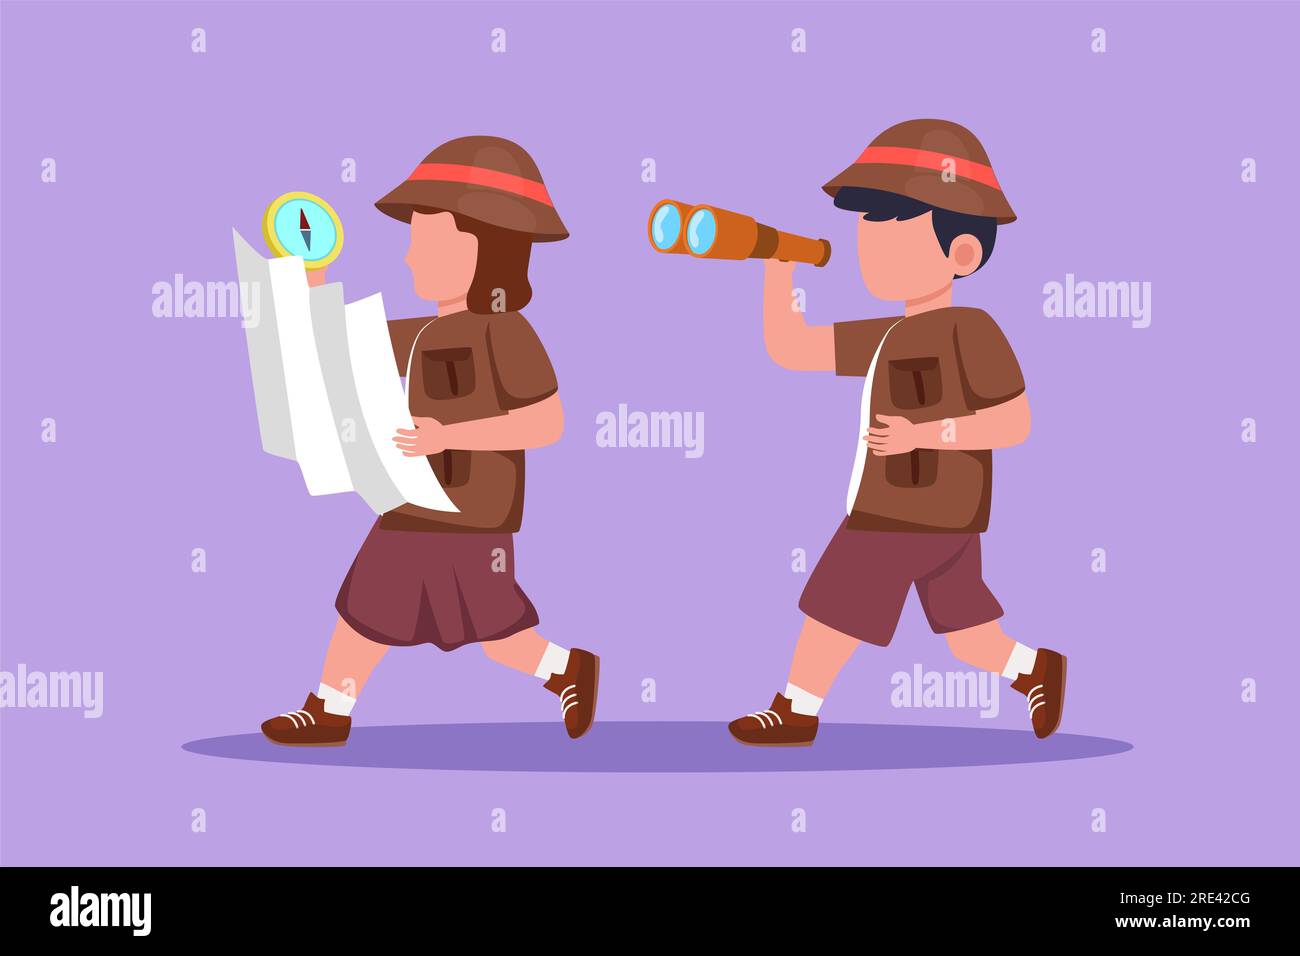 Cartoon flat style drawing little boys and girls scout walking with binoculars and map. Children scout adventure camping concept. Hiking recreational Stock Photo